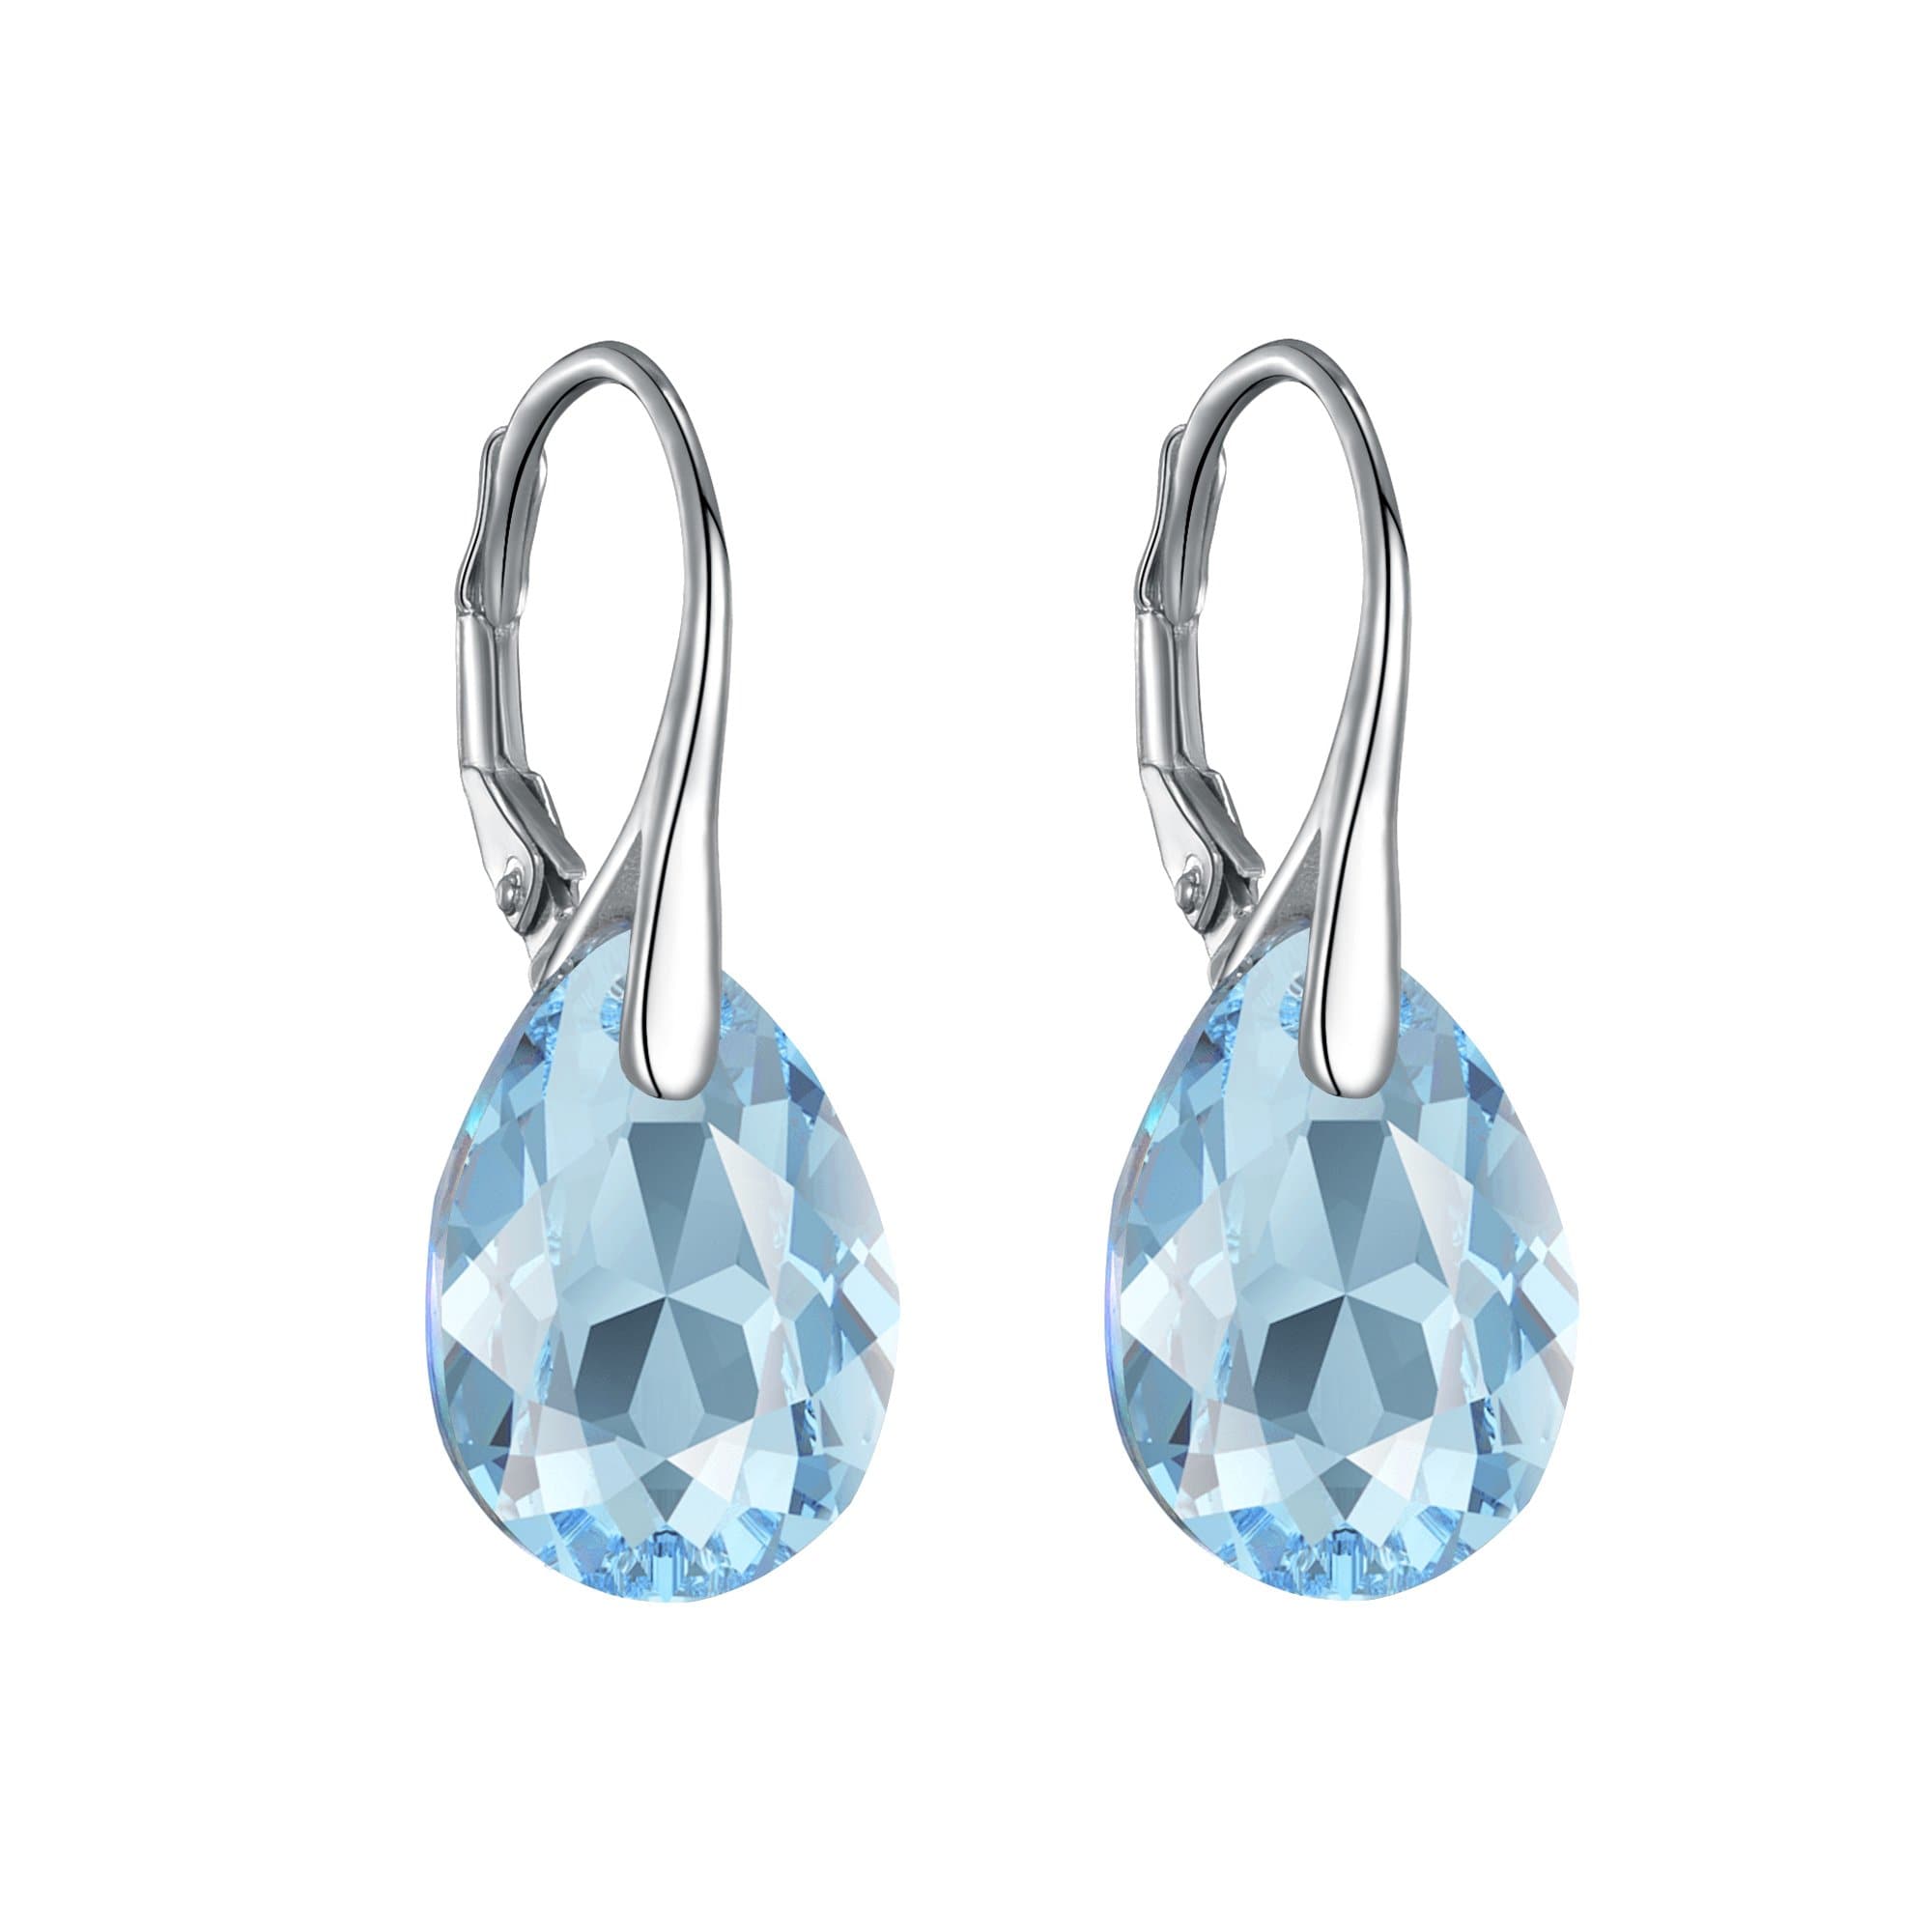 Sterling Silver Aquamarine Drop Earrings Created with Zircondia® Crystals by Philip Jones Jewellery